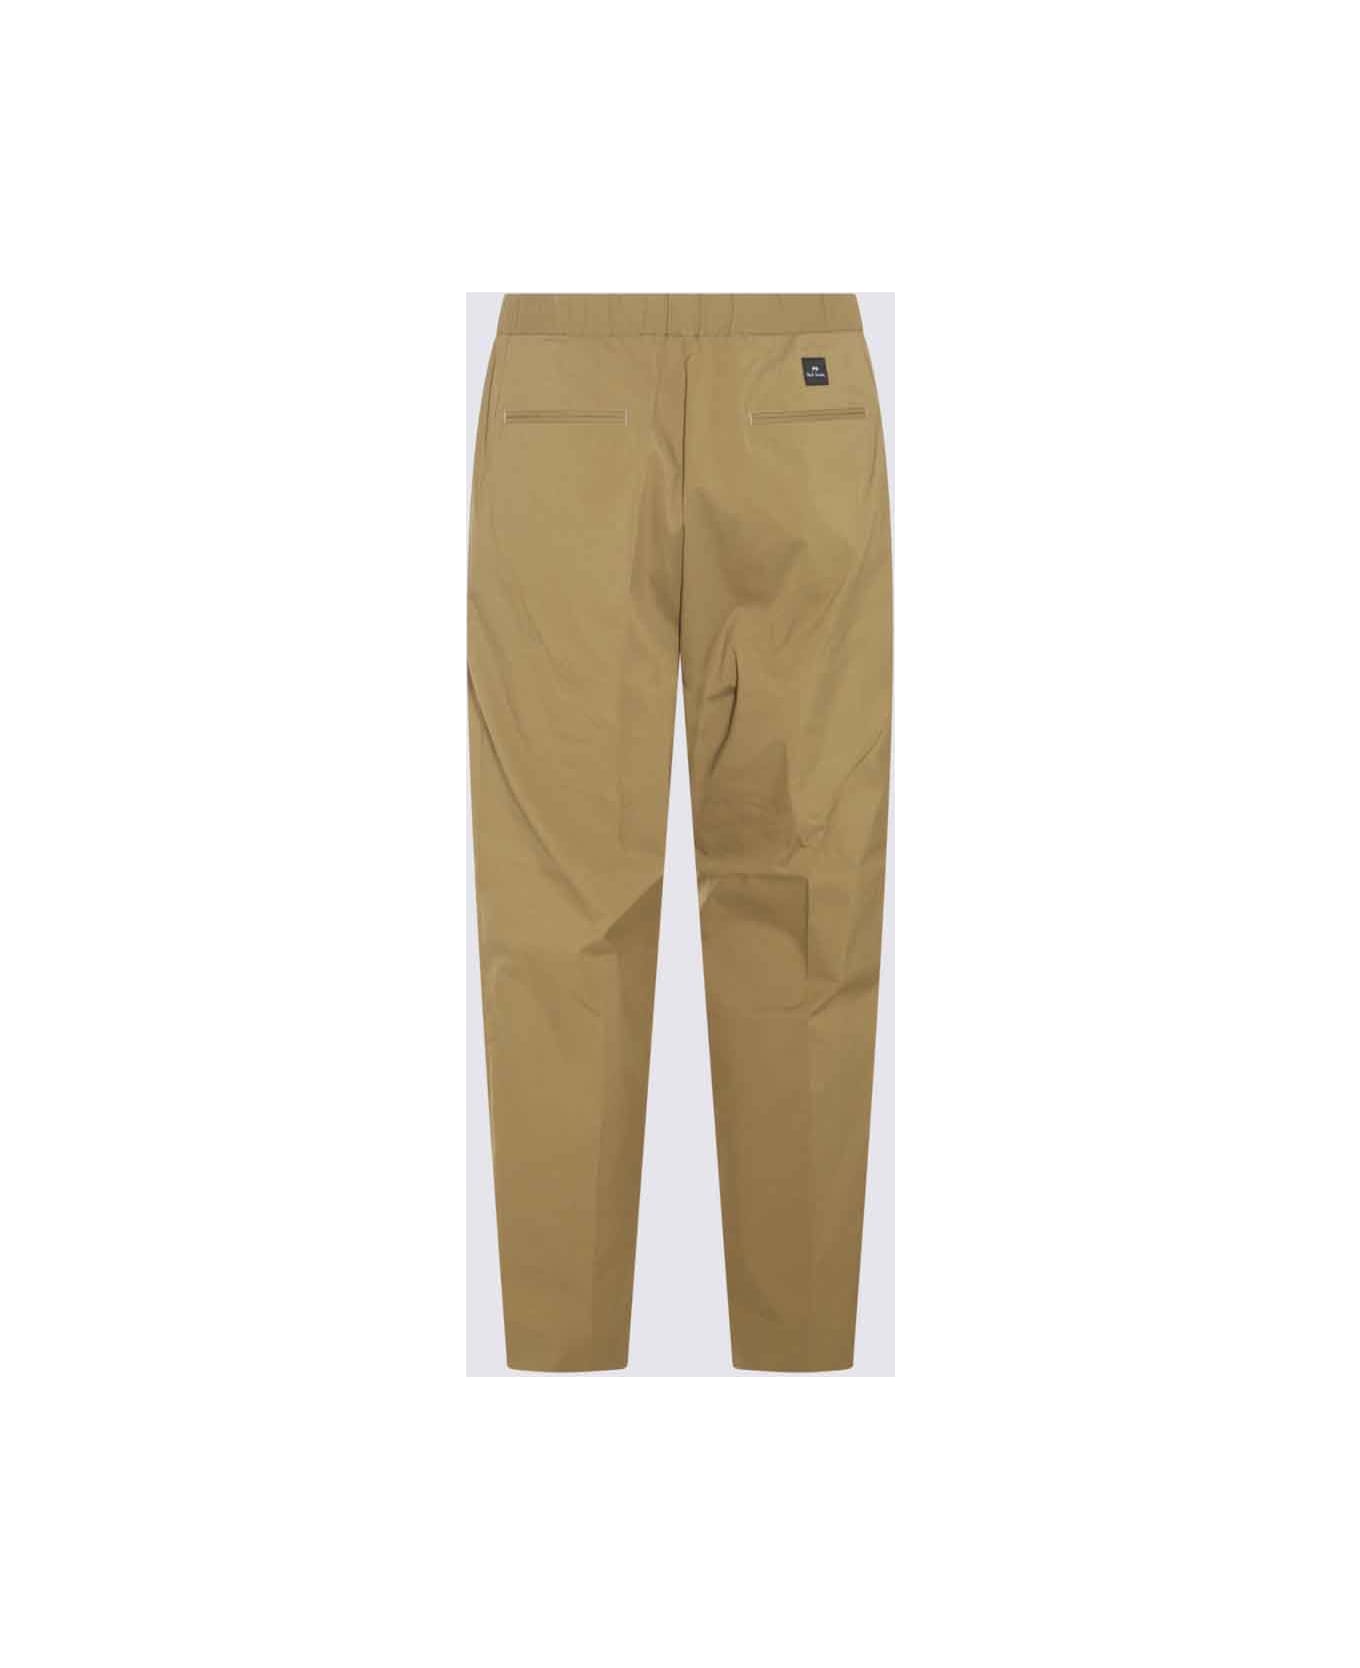 Paul Smith Beige Cotton Pants - Green ボトムス